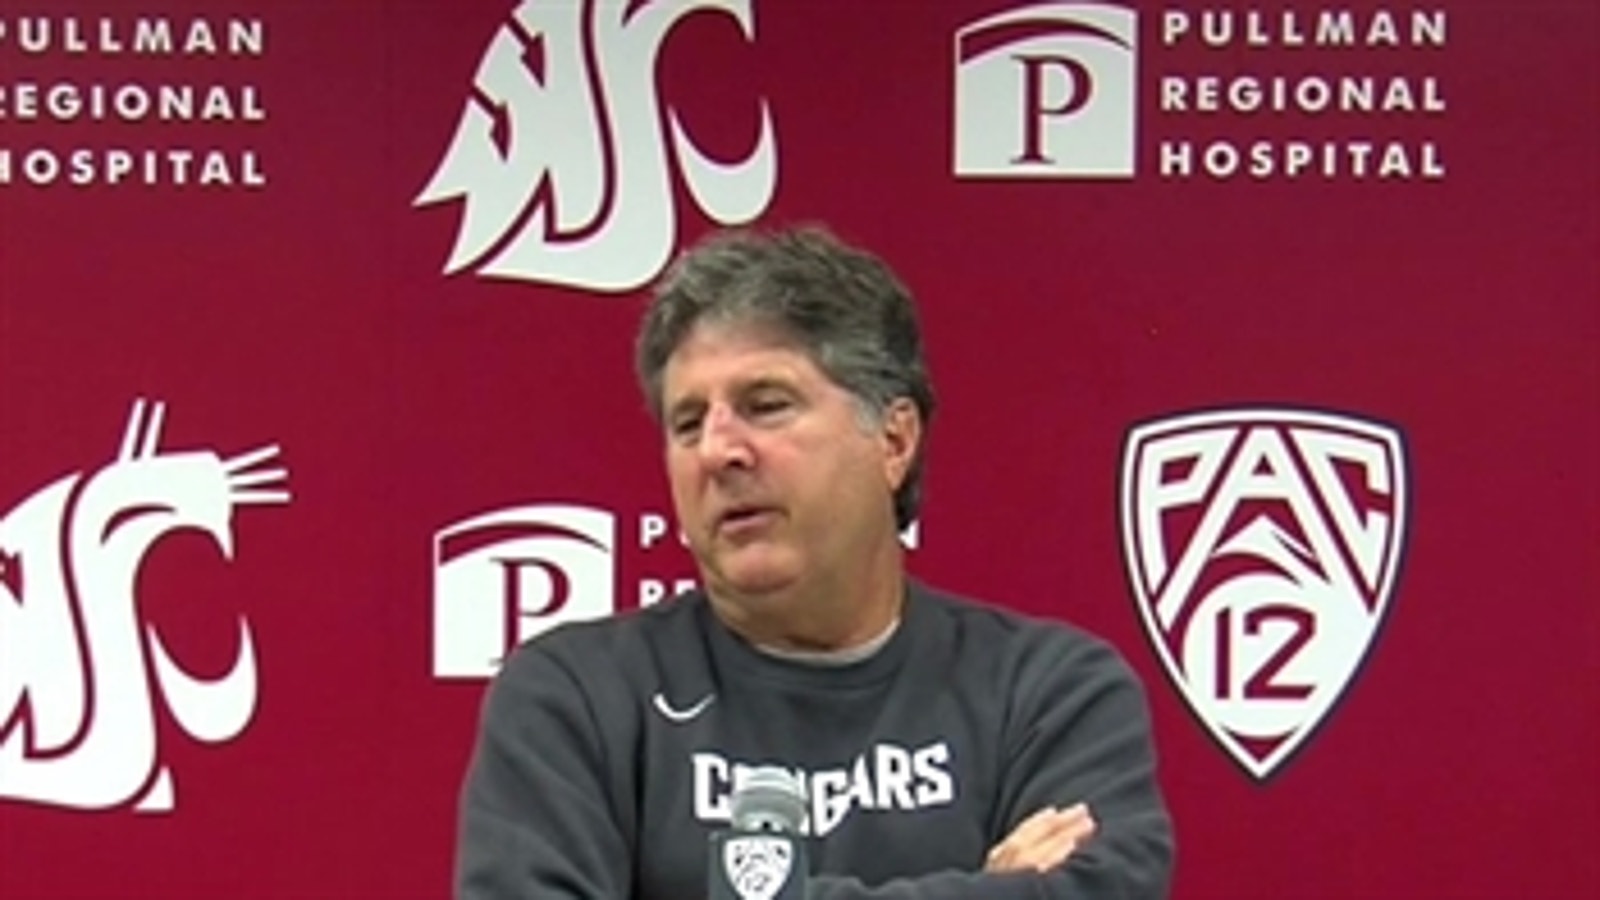 Mike Leach breaks down which Pac-12 mascot would win in a fight